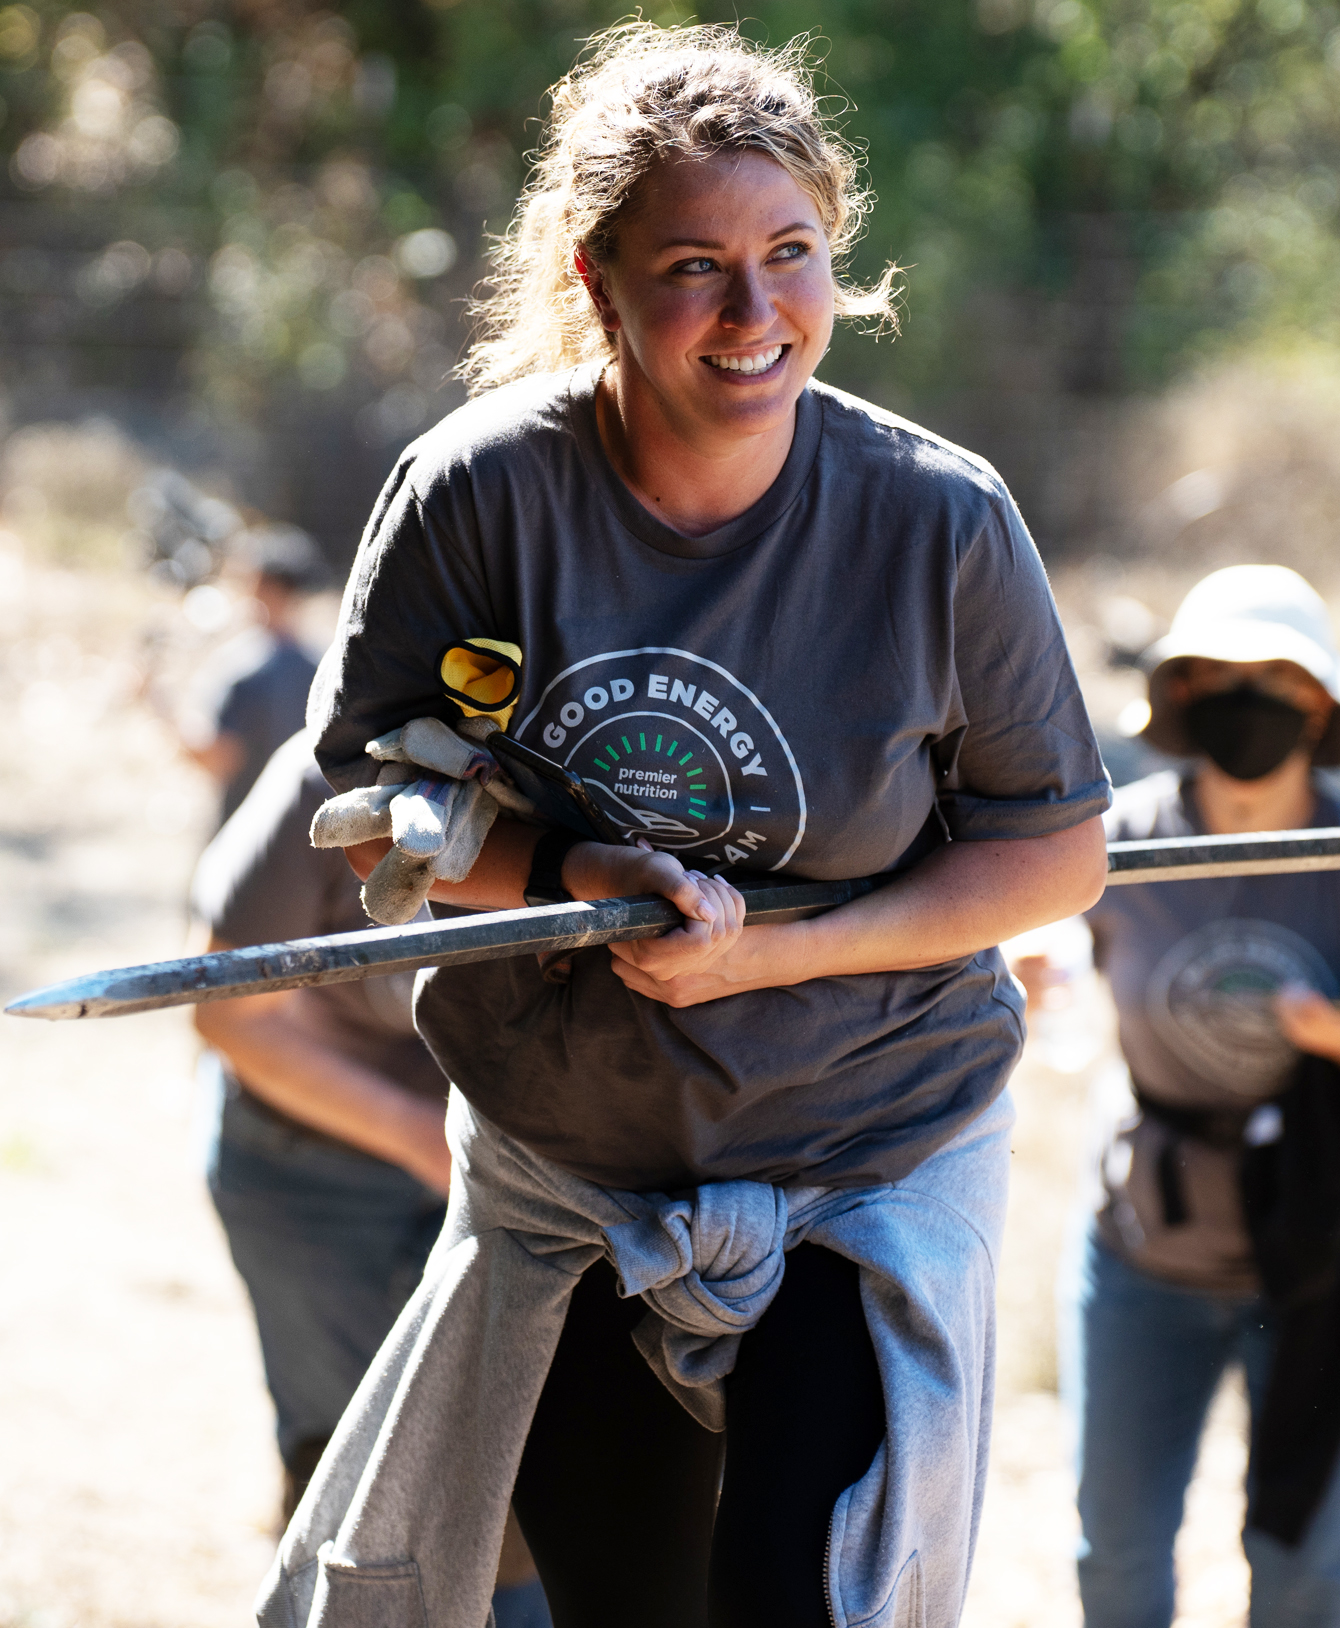 A Premier Nutrition employee at a volunteer day.